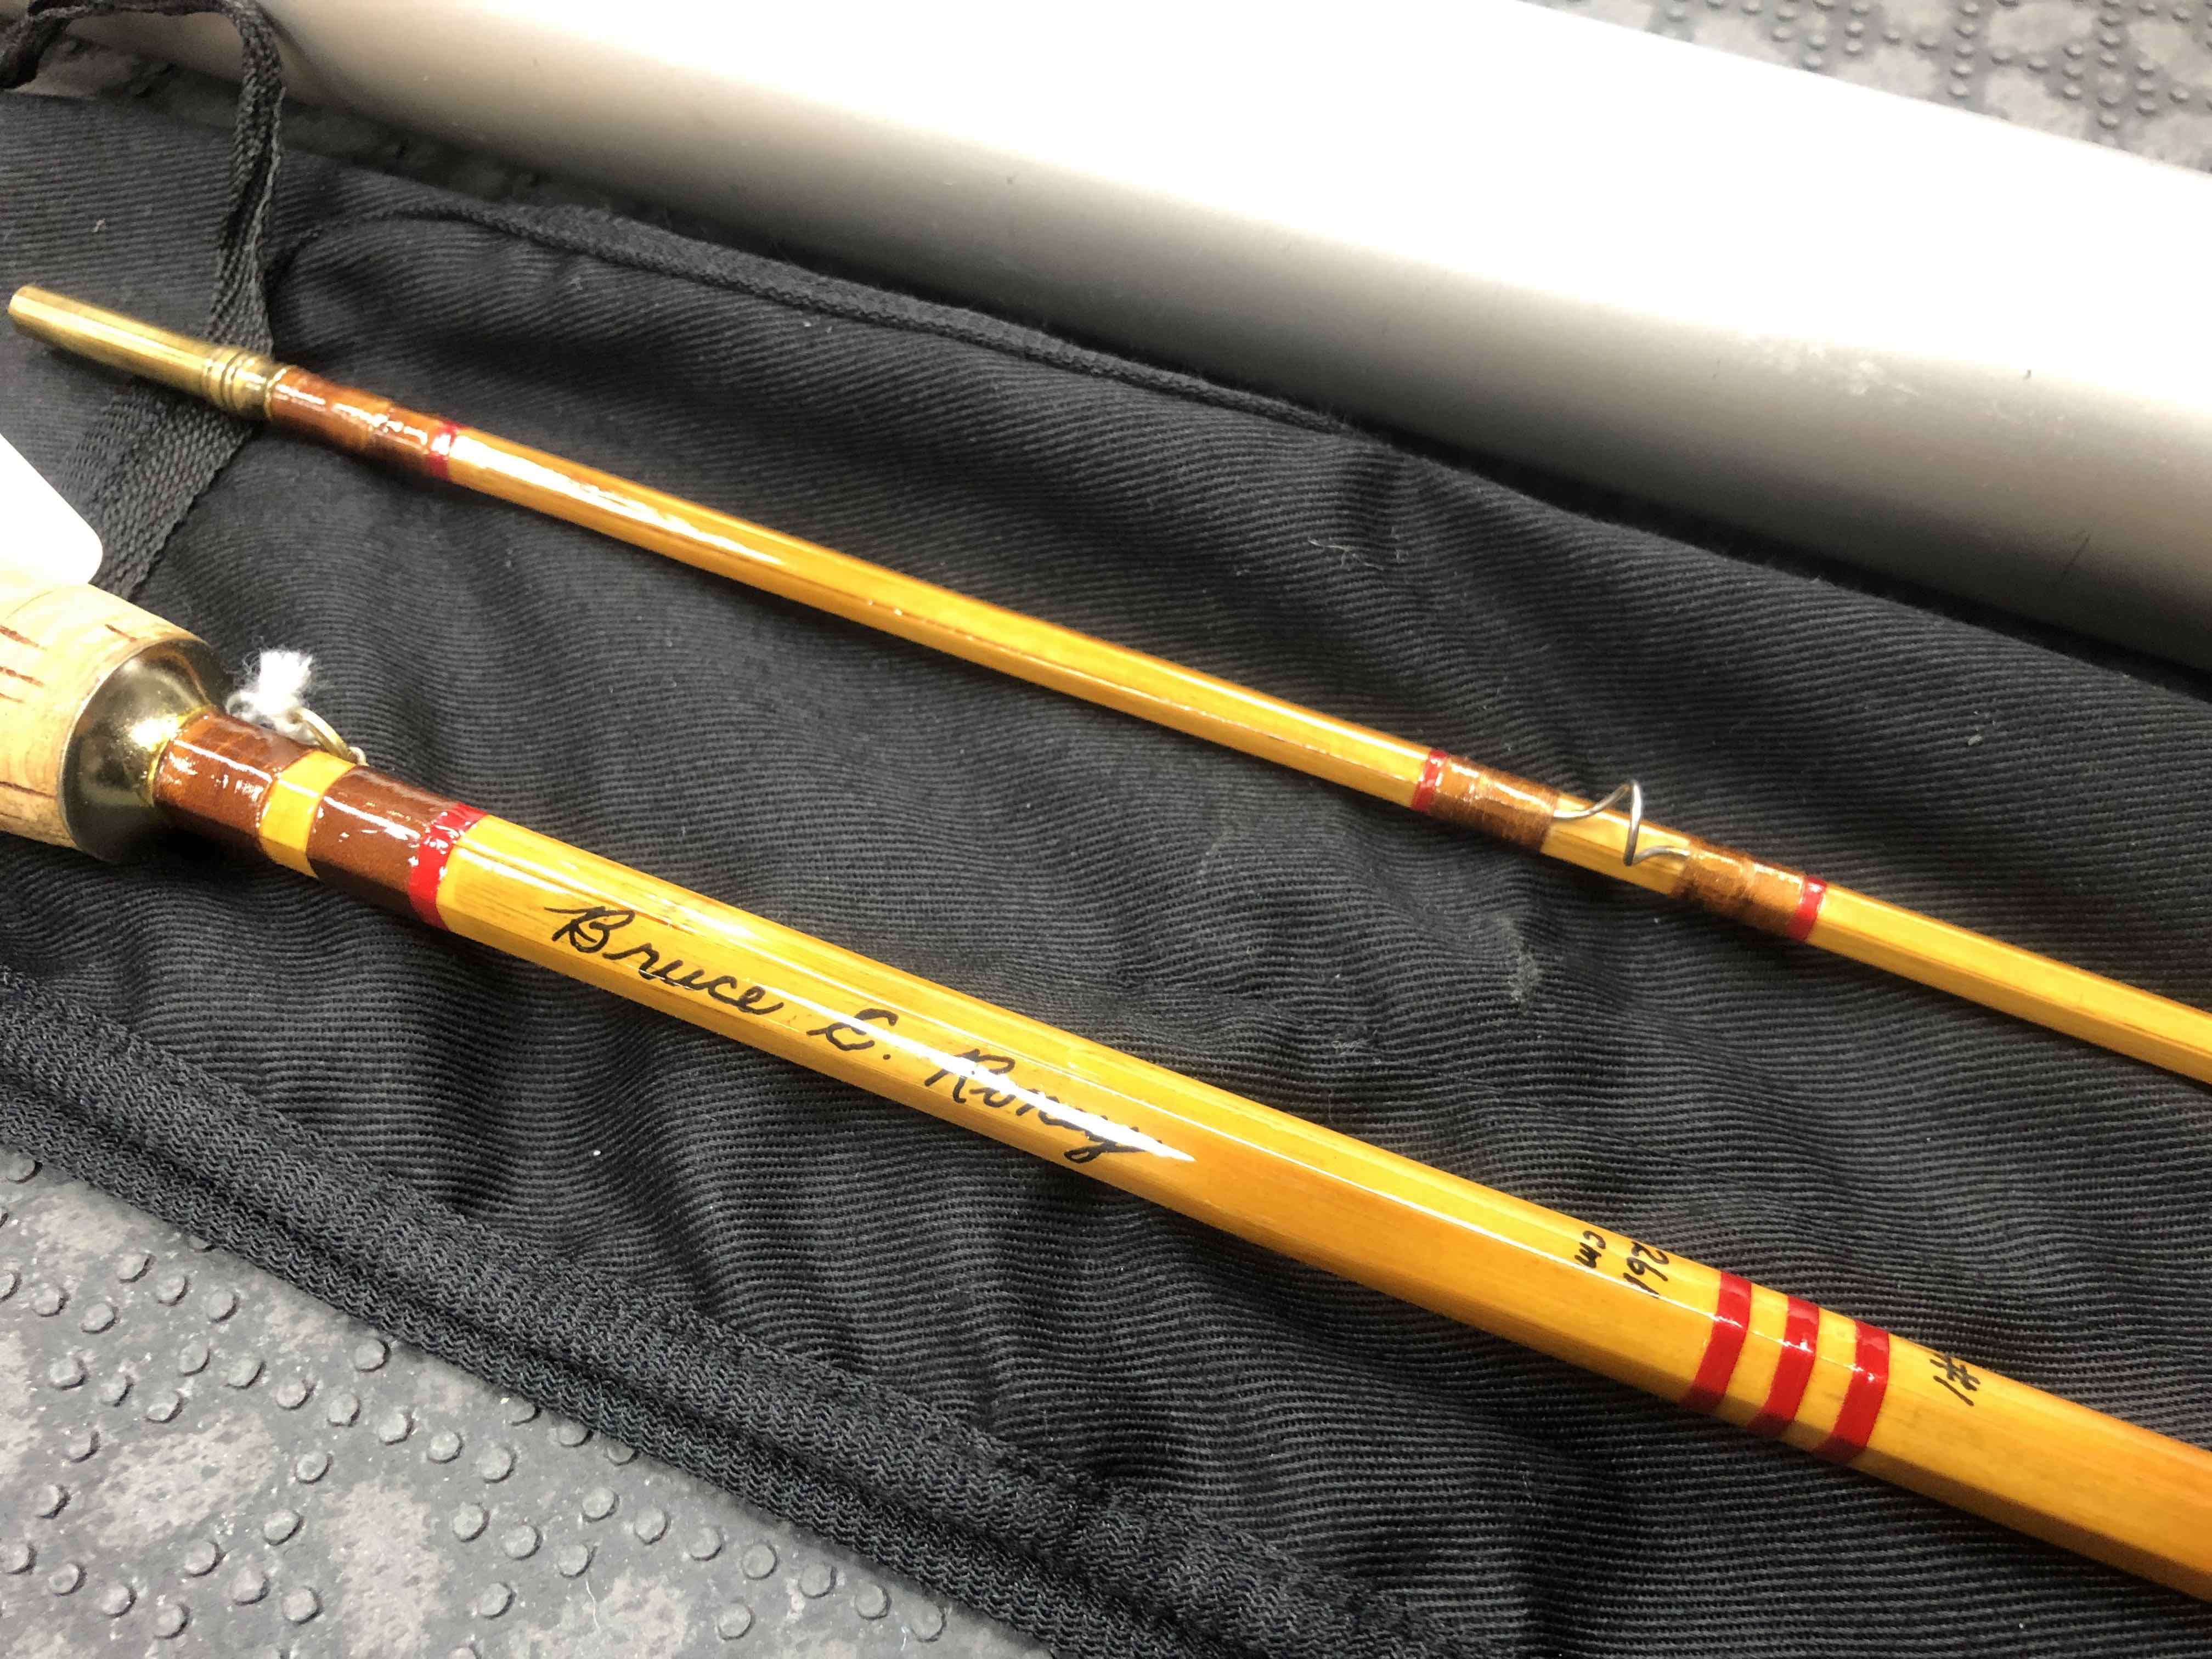 Bamboo Cane Rod Fly Rod - Built by Owner From Genuine Tonkin Cane in 1975 - 2Pc - 9’ - 5Wt - "Dry Fly Action" - C/W Sock & Aluminum Tube - BEAUTIFUL CONDITION! - $280